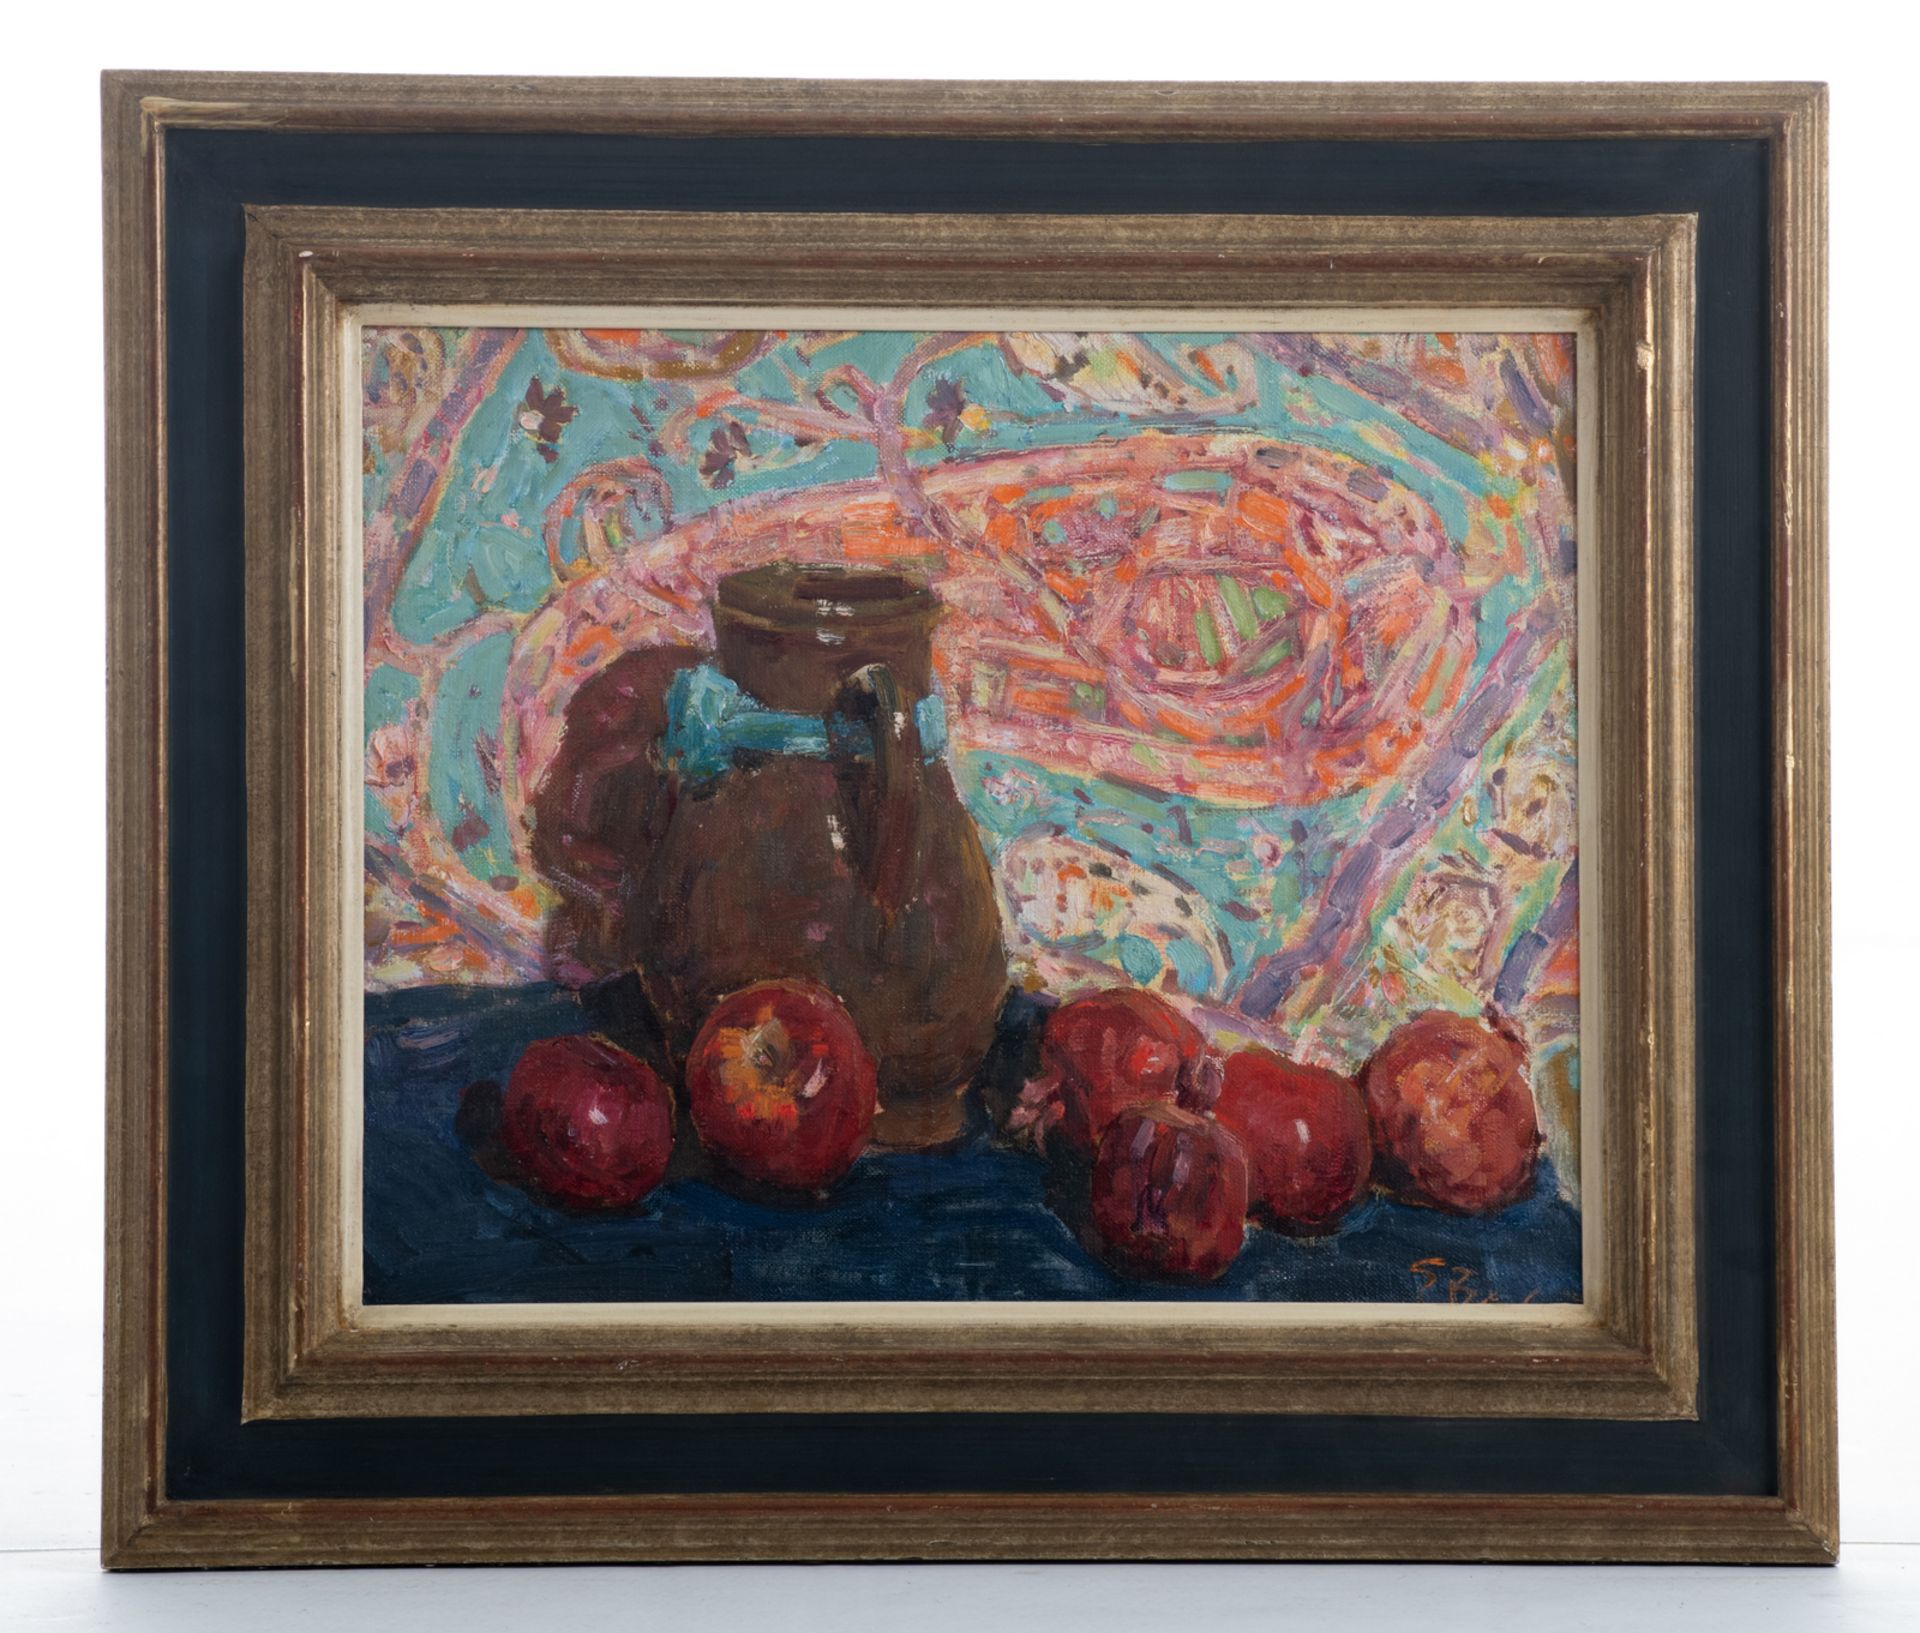 Vechtomov E., a still life with apples, oil on canvas, dated 2003, 40 x 49,5 cm - Image 2 of 5